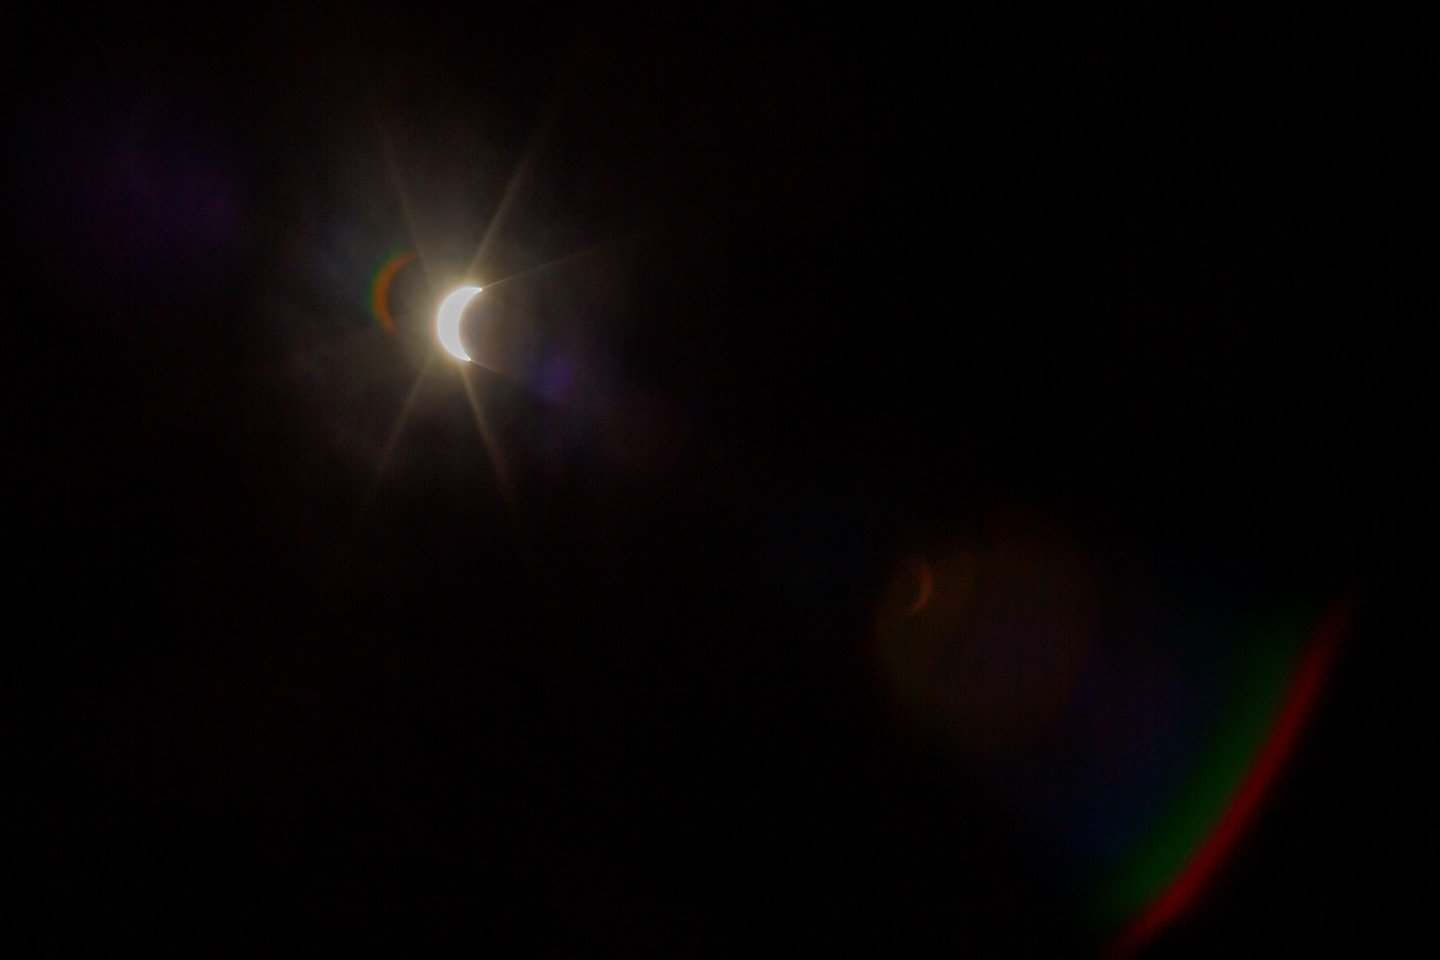 Taking a break from my regular content and finally looking at the images I took yesterday during the Solar Eclipse&hellip; what an incredible thing to experience!  I thought I didn&rsquo;t capture anything worth sharing, but once I uploaded (and edit